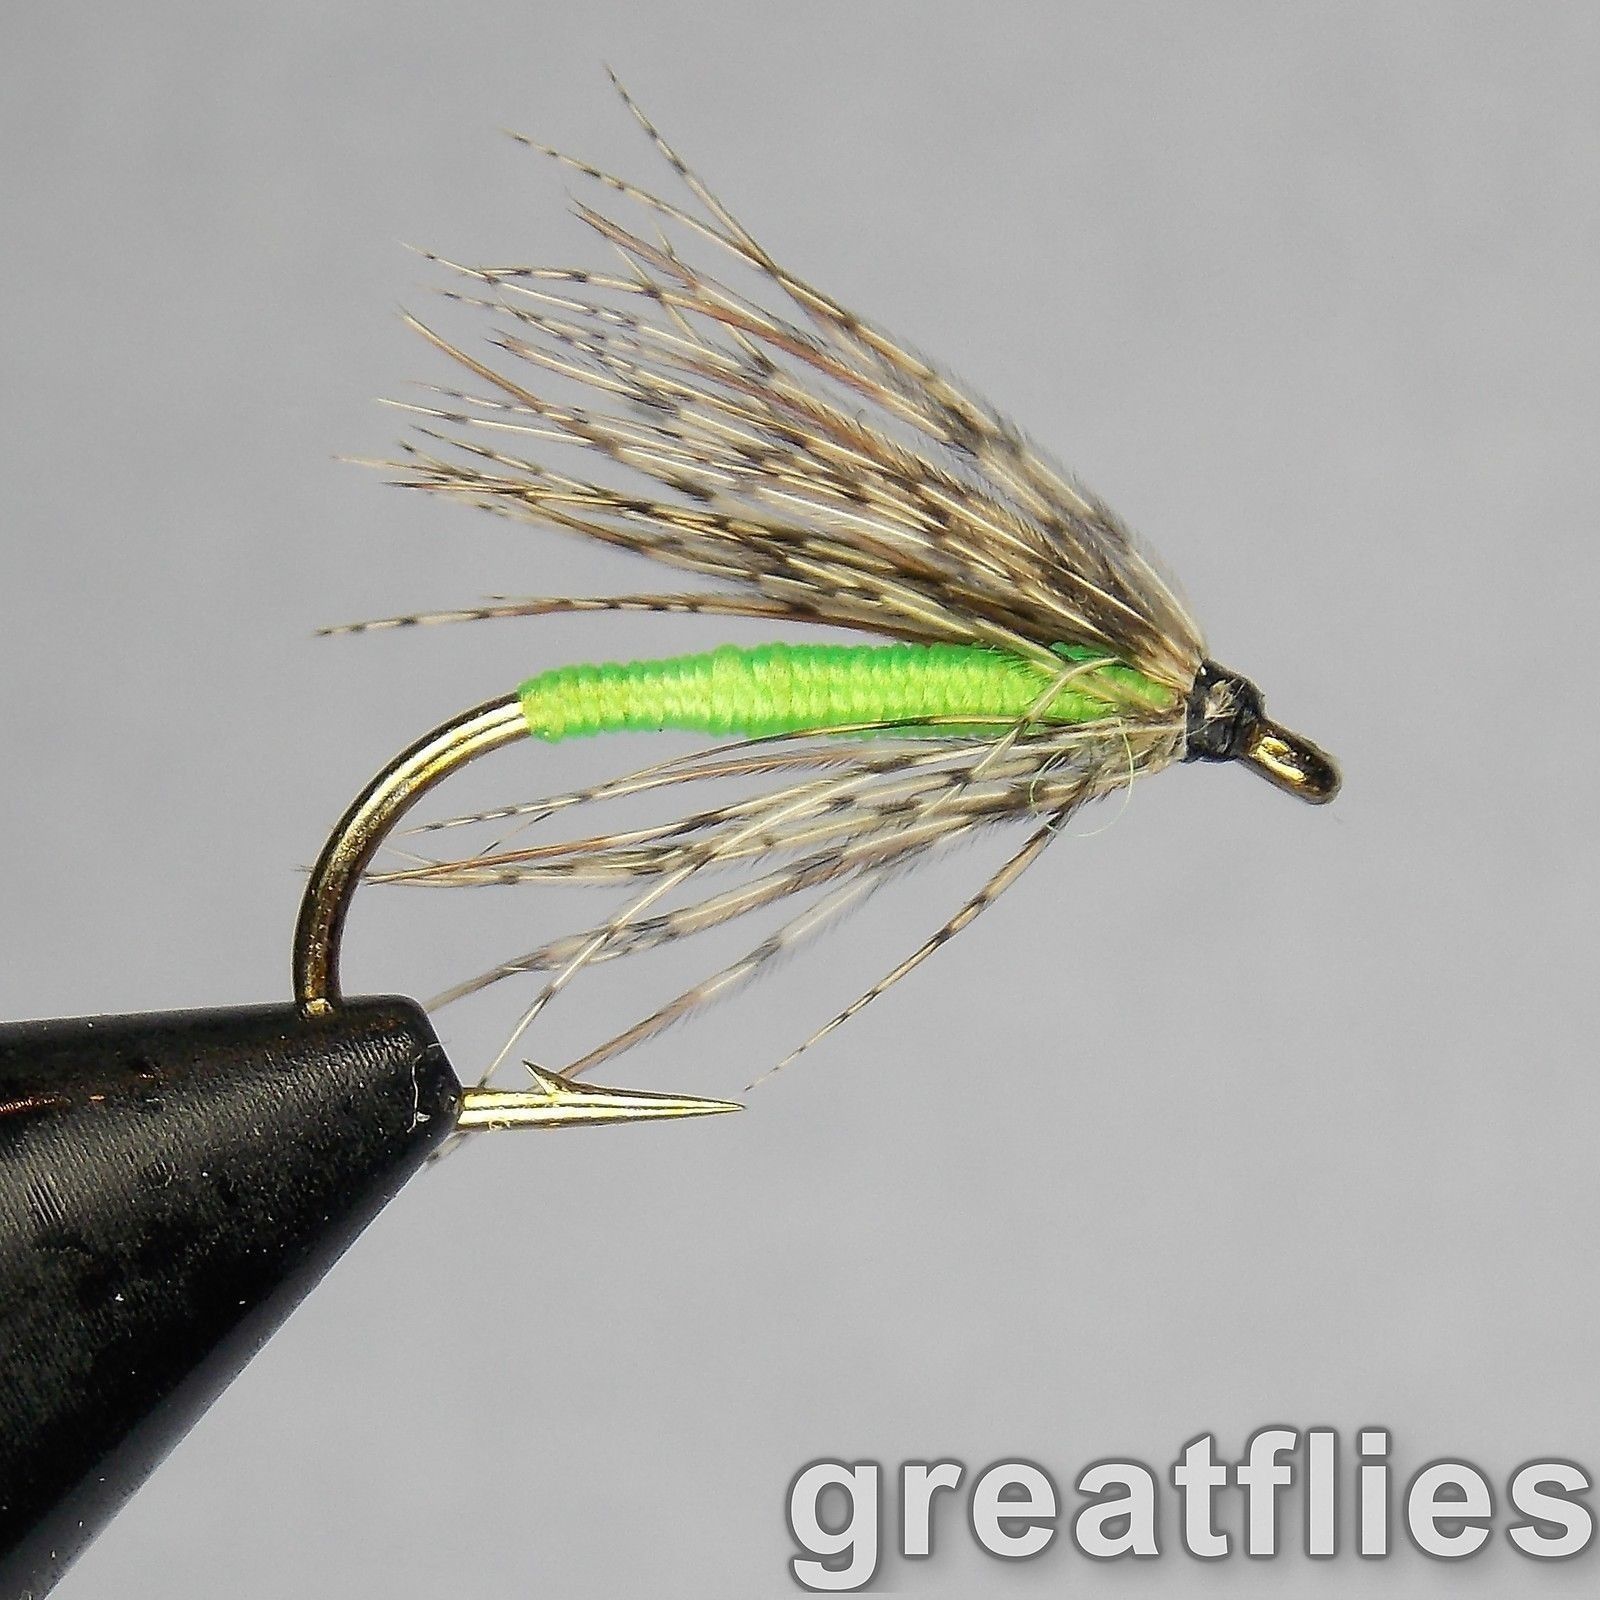 Great Flies Fluorocarbon Tapered Leader - 3 pack - available in 0X, 1X, 2X,  3X, 4X, 5X, 6X, 7X